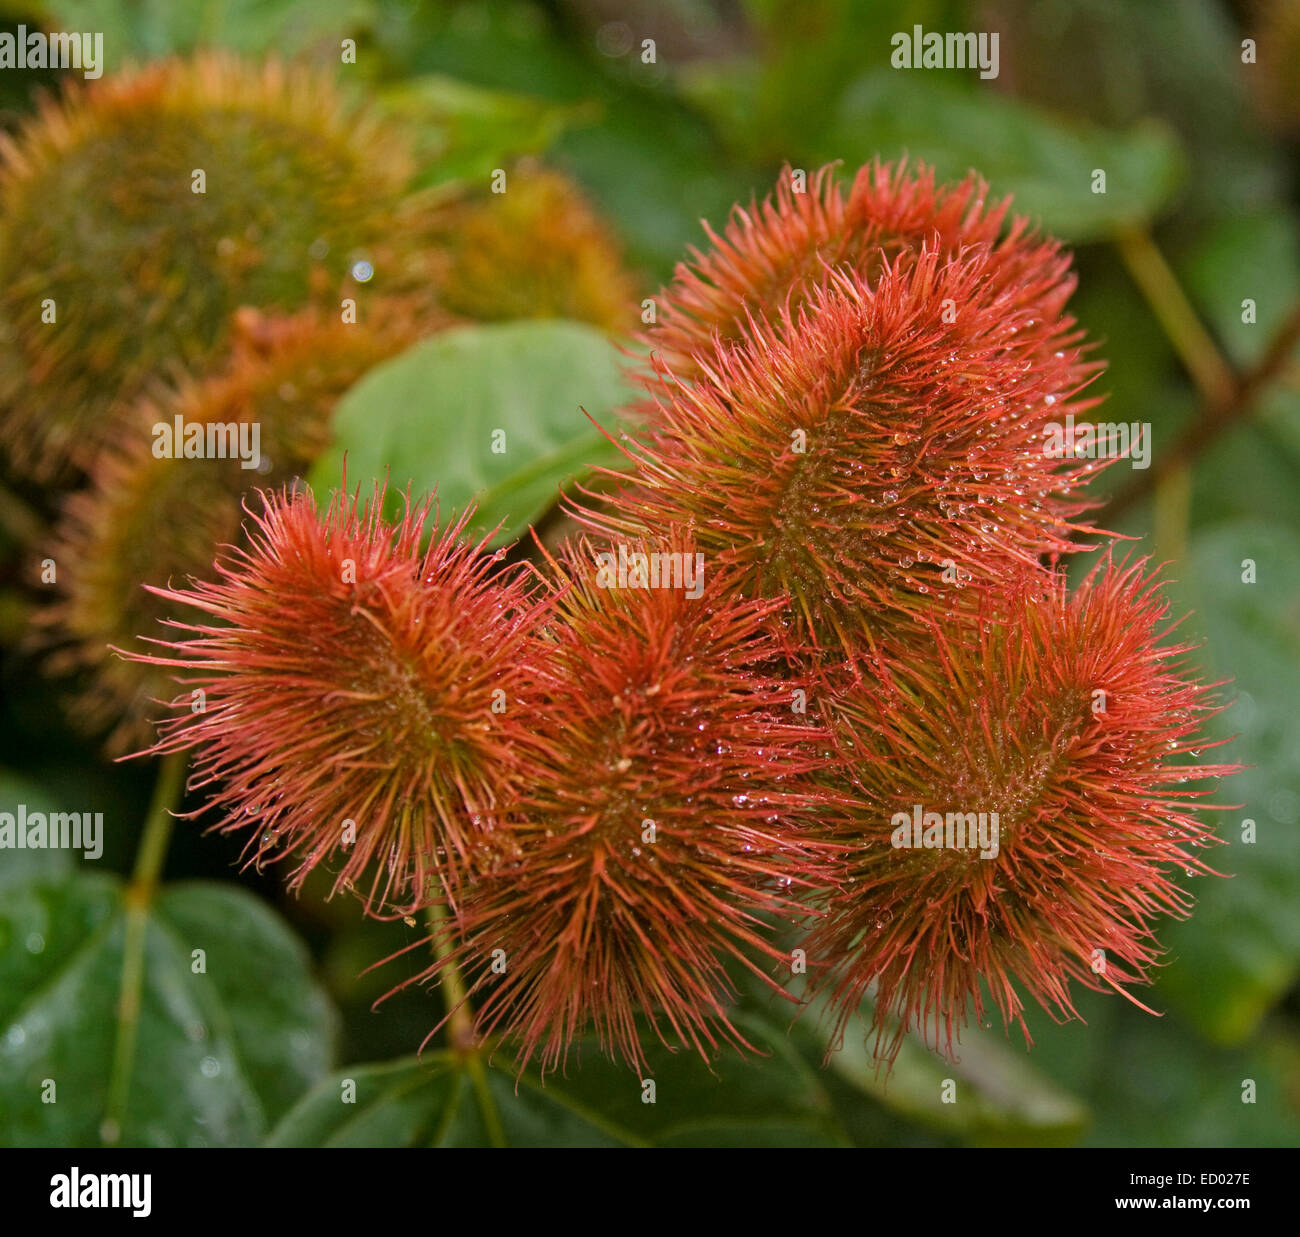 Cluster of unusual & attractive bright red hairy seed pods of Bixa orellana, an ornamental flowering shrub Stock Photo